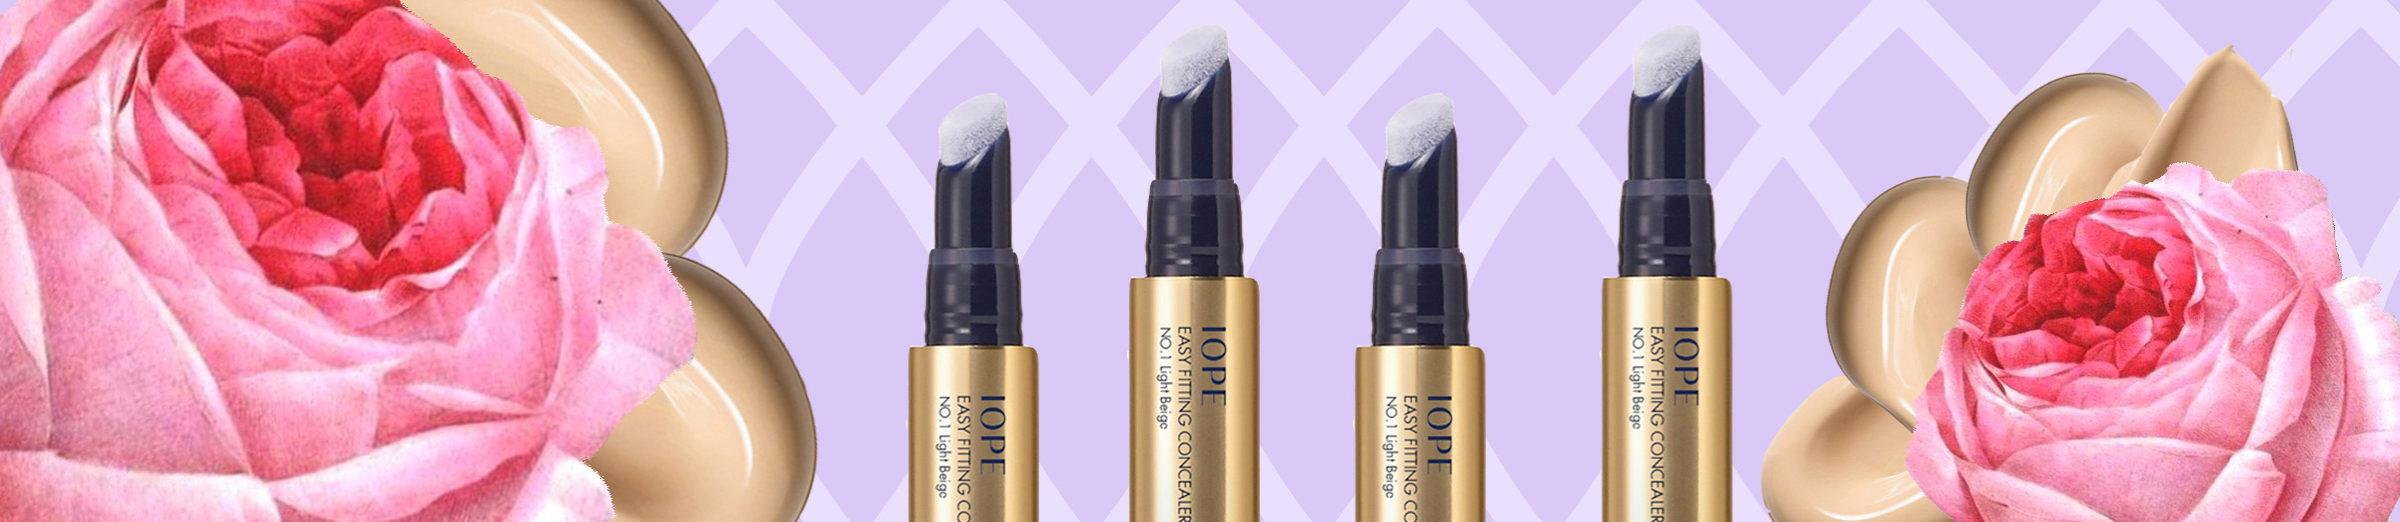 Is Iope Easy Fitting Concealer a Dupe For the Famous YSL Touche Eclat?